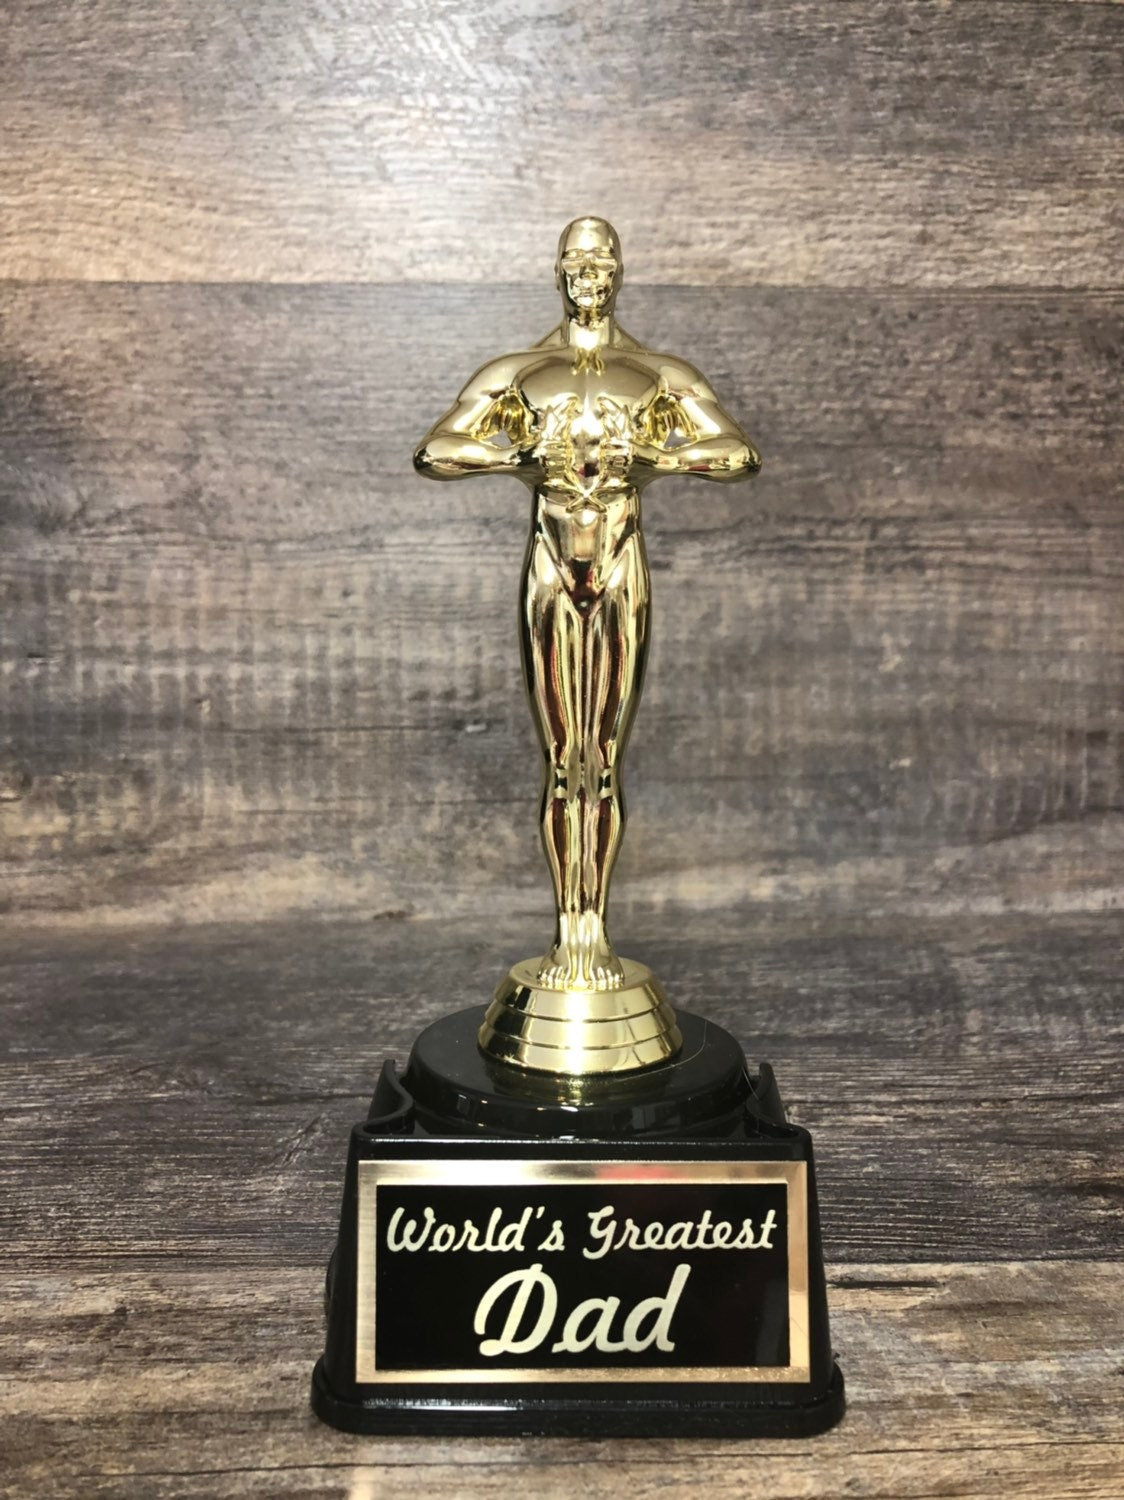 World's Greatest Dad Best Dad Personalized Father's Day Gift Trophy Custom Appreciation Award Employee of the Month Achievement Award